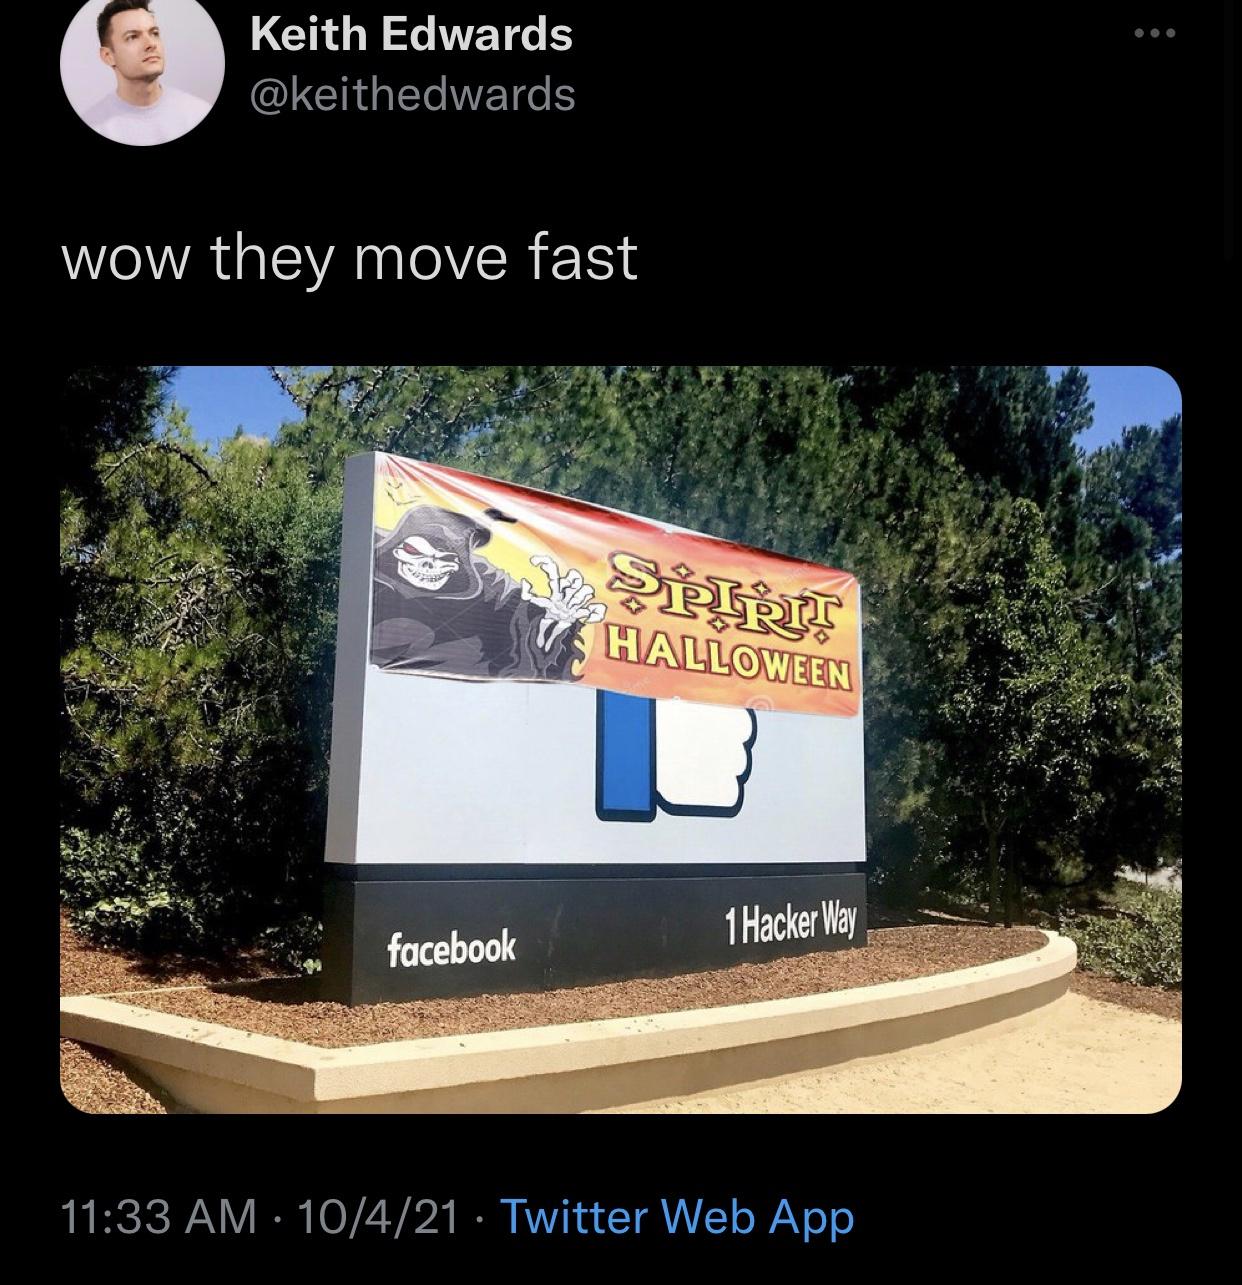 funny memes - hilarious memes - display advertising - Keith Edwards wow they move fast Spirit Halloween 1 Hacker Way facebook 10421 Twitter Web App